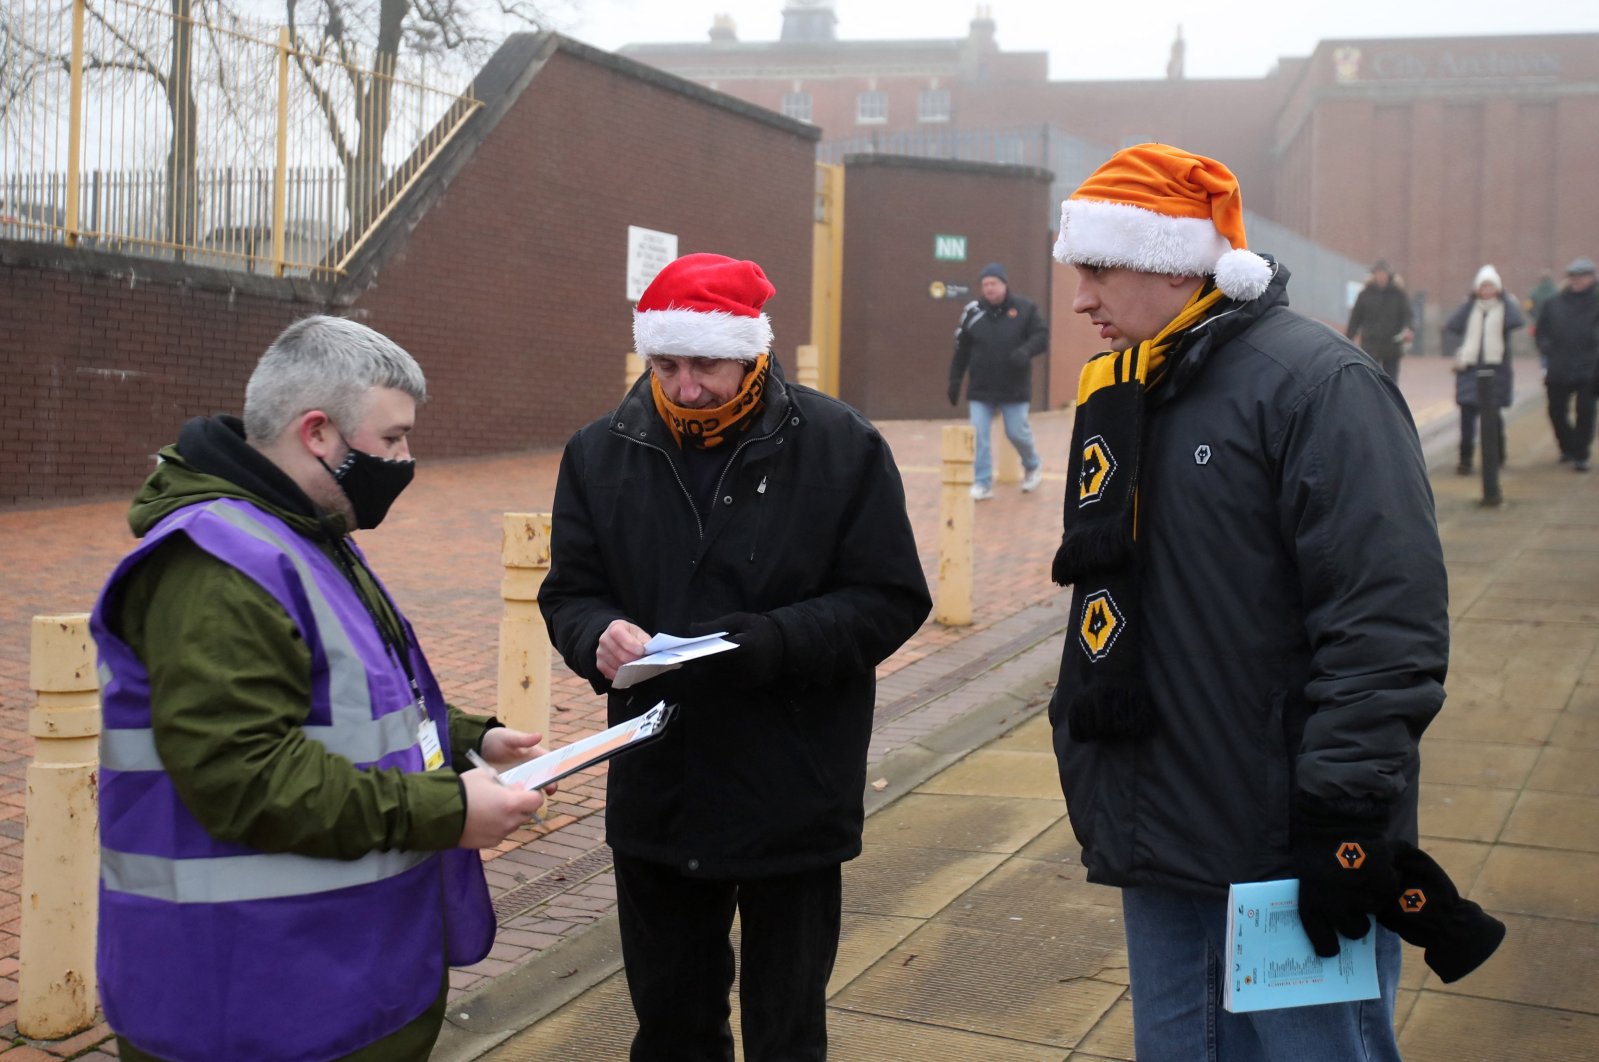 Fans get their COVID-19 passes checked outside the stadium before a Premier League match between Wolves and Chelsea, Wolverhampton, England, Dec. 19, 2021.